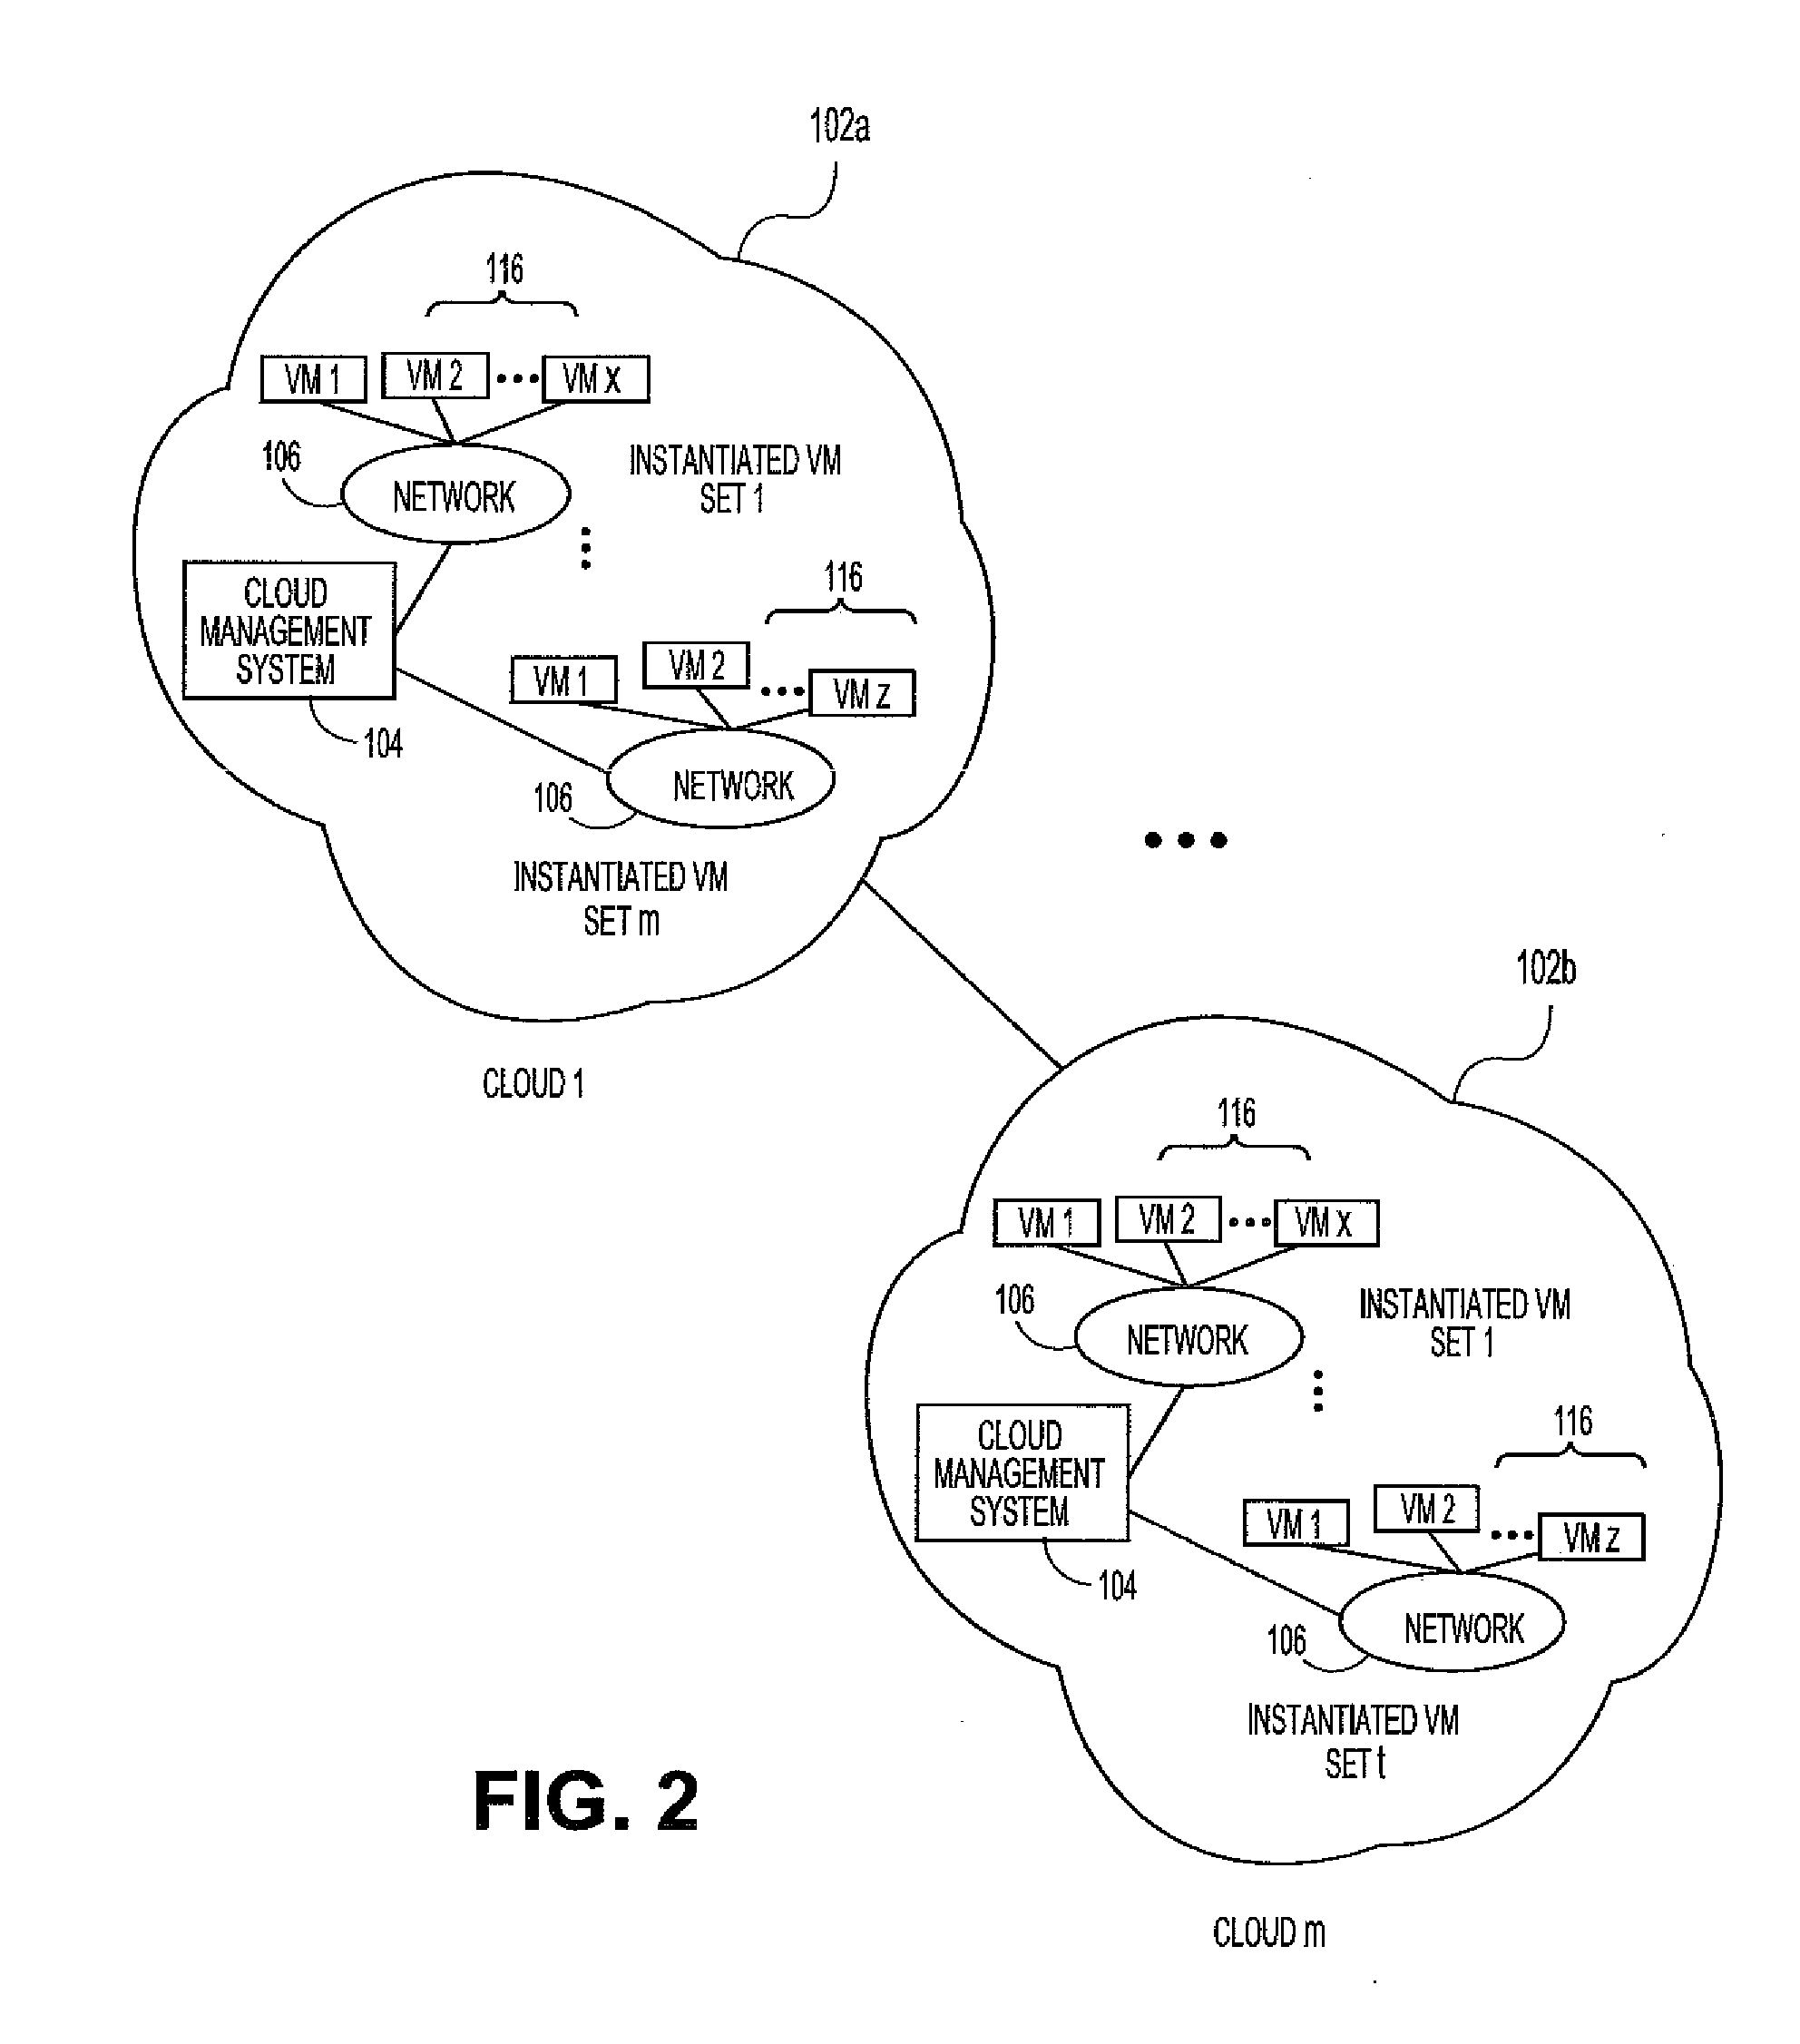 Systems and methods for managing multi-level service level agreements in cloud-based networks